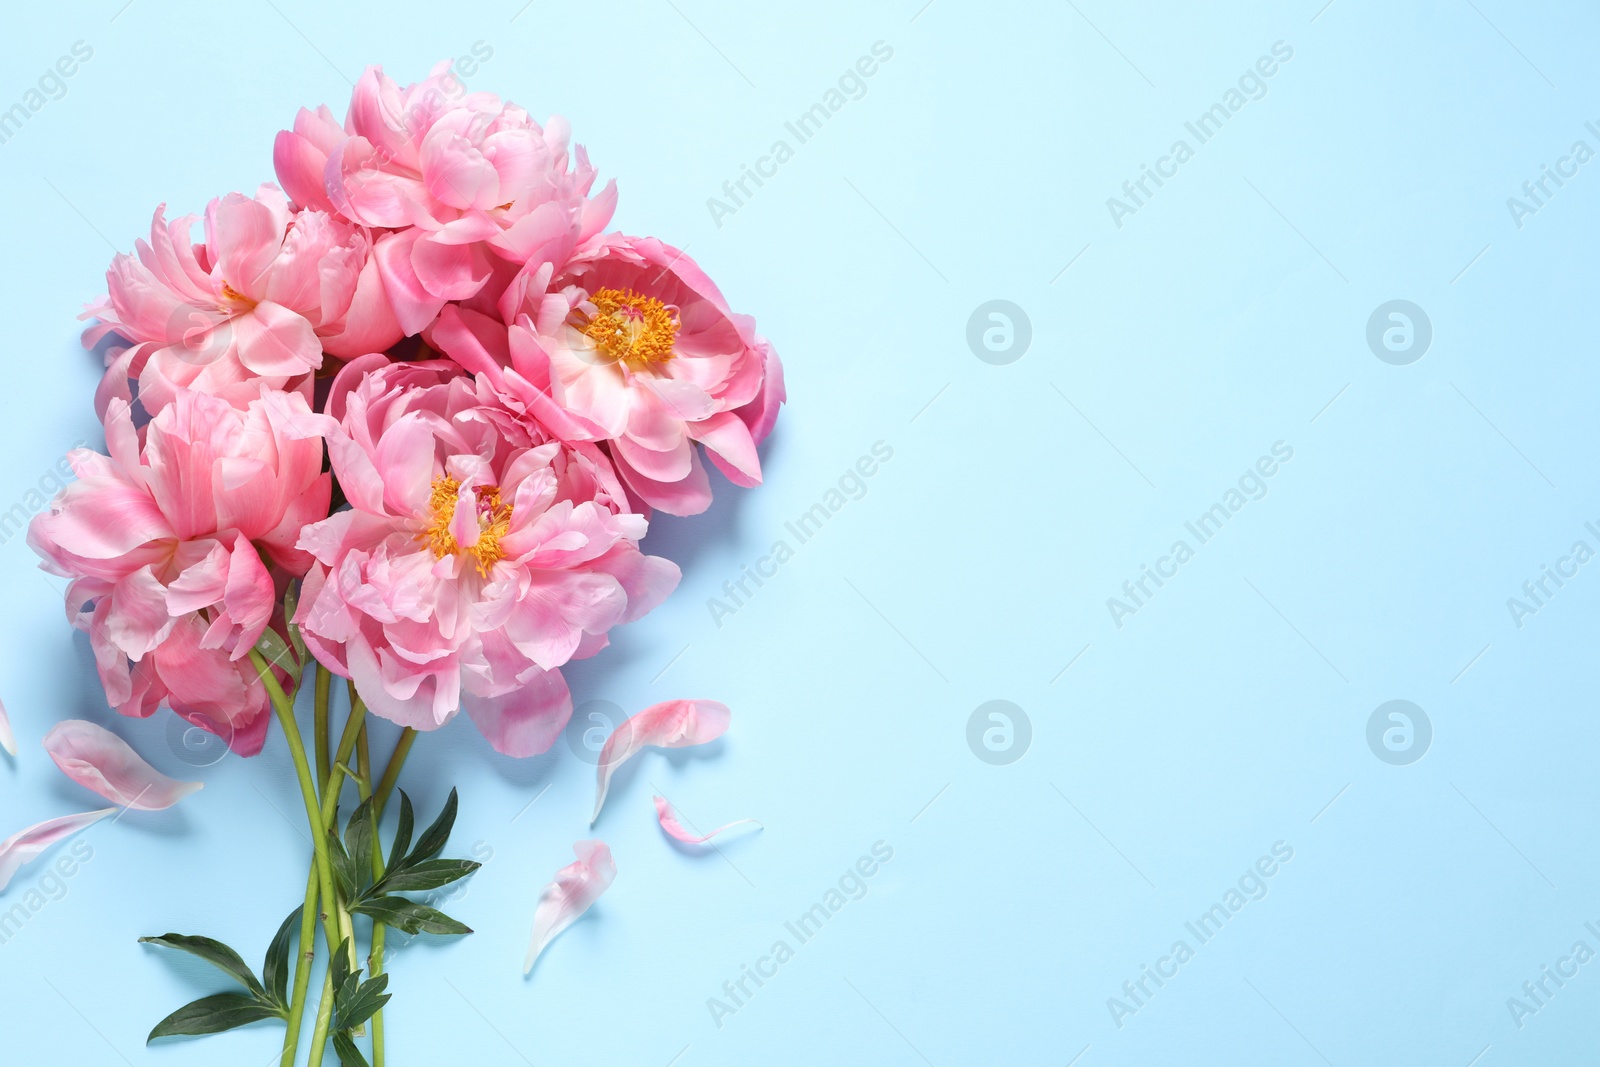 Photo of Bunch of beautiful pink peonies and petals on light turquoise background, flat lay. Space for text